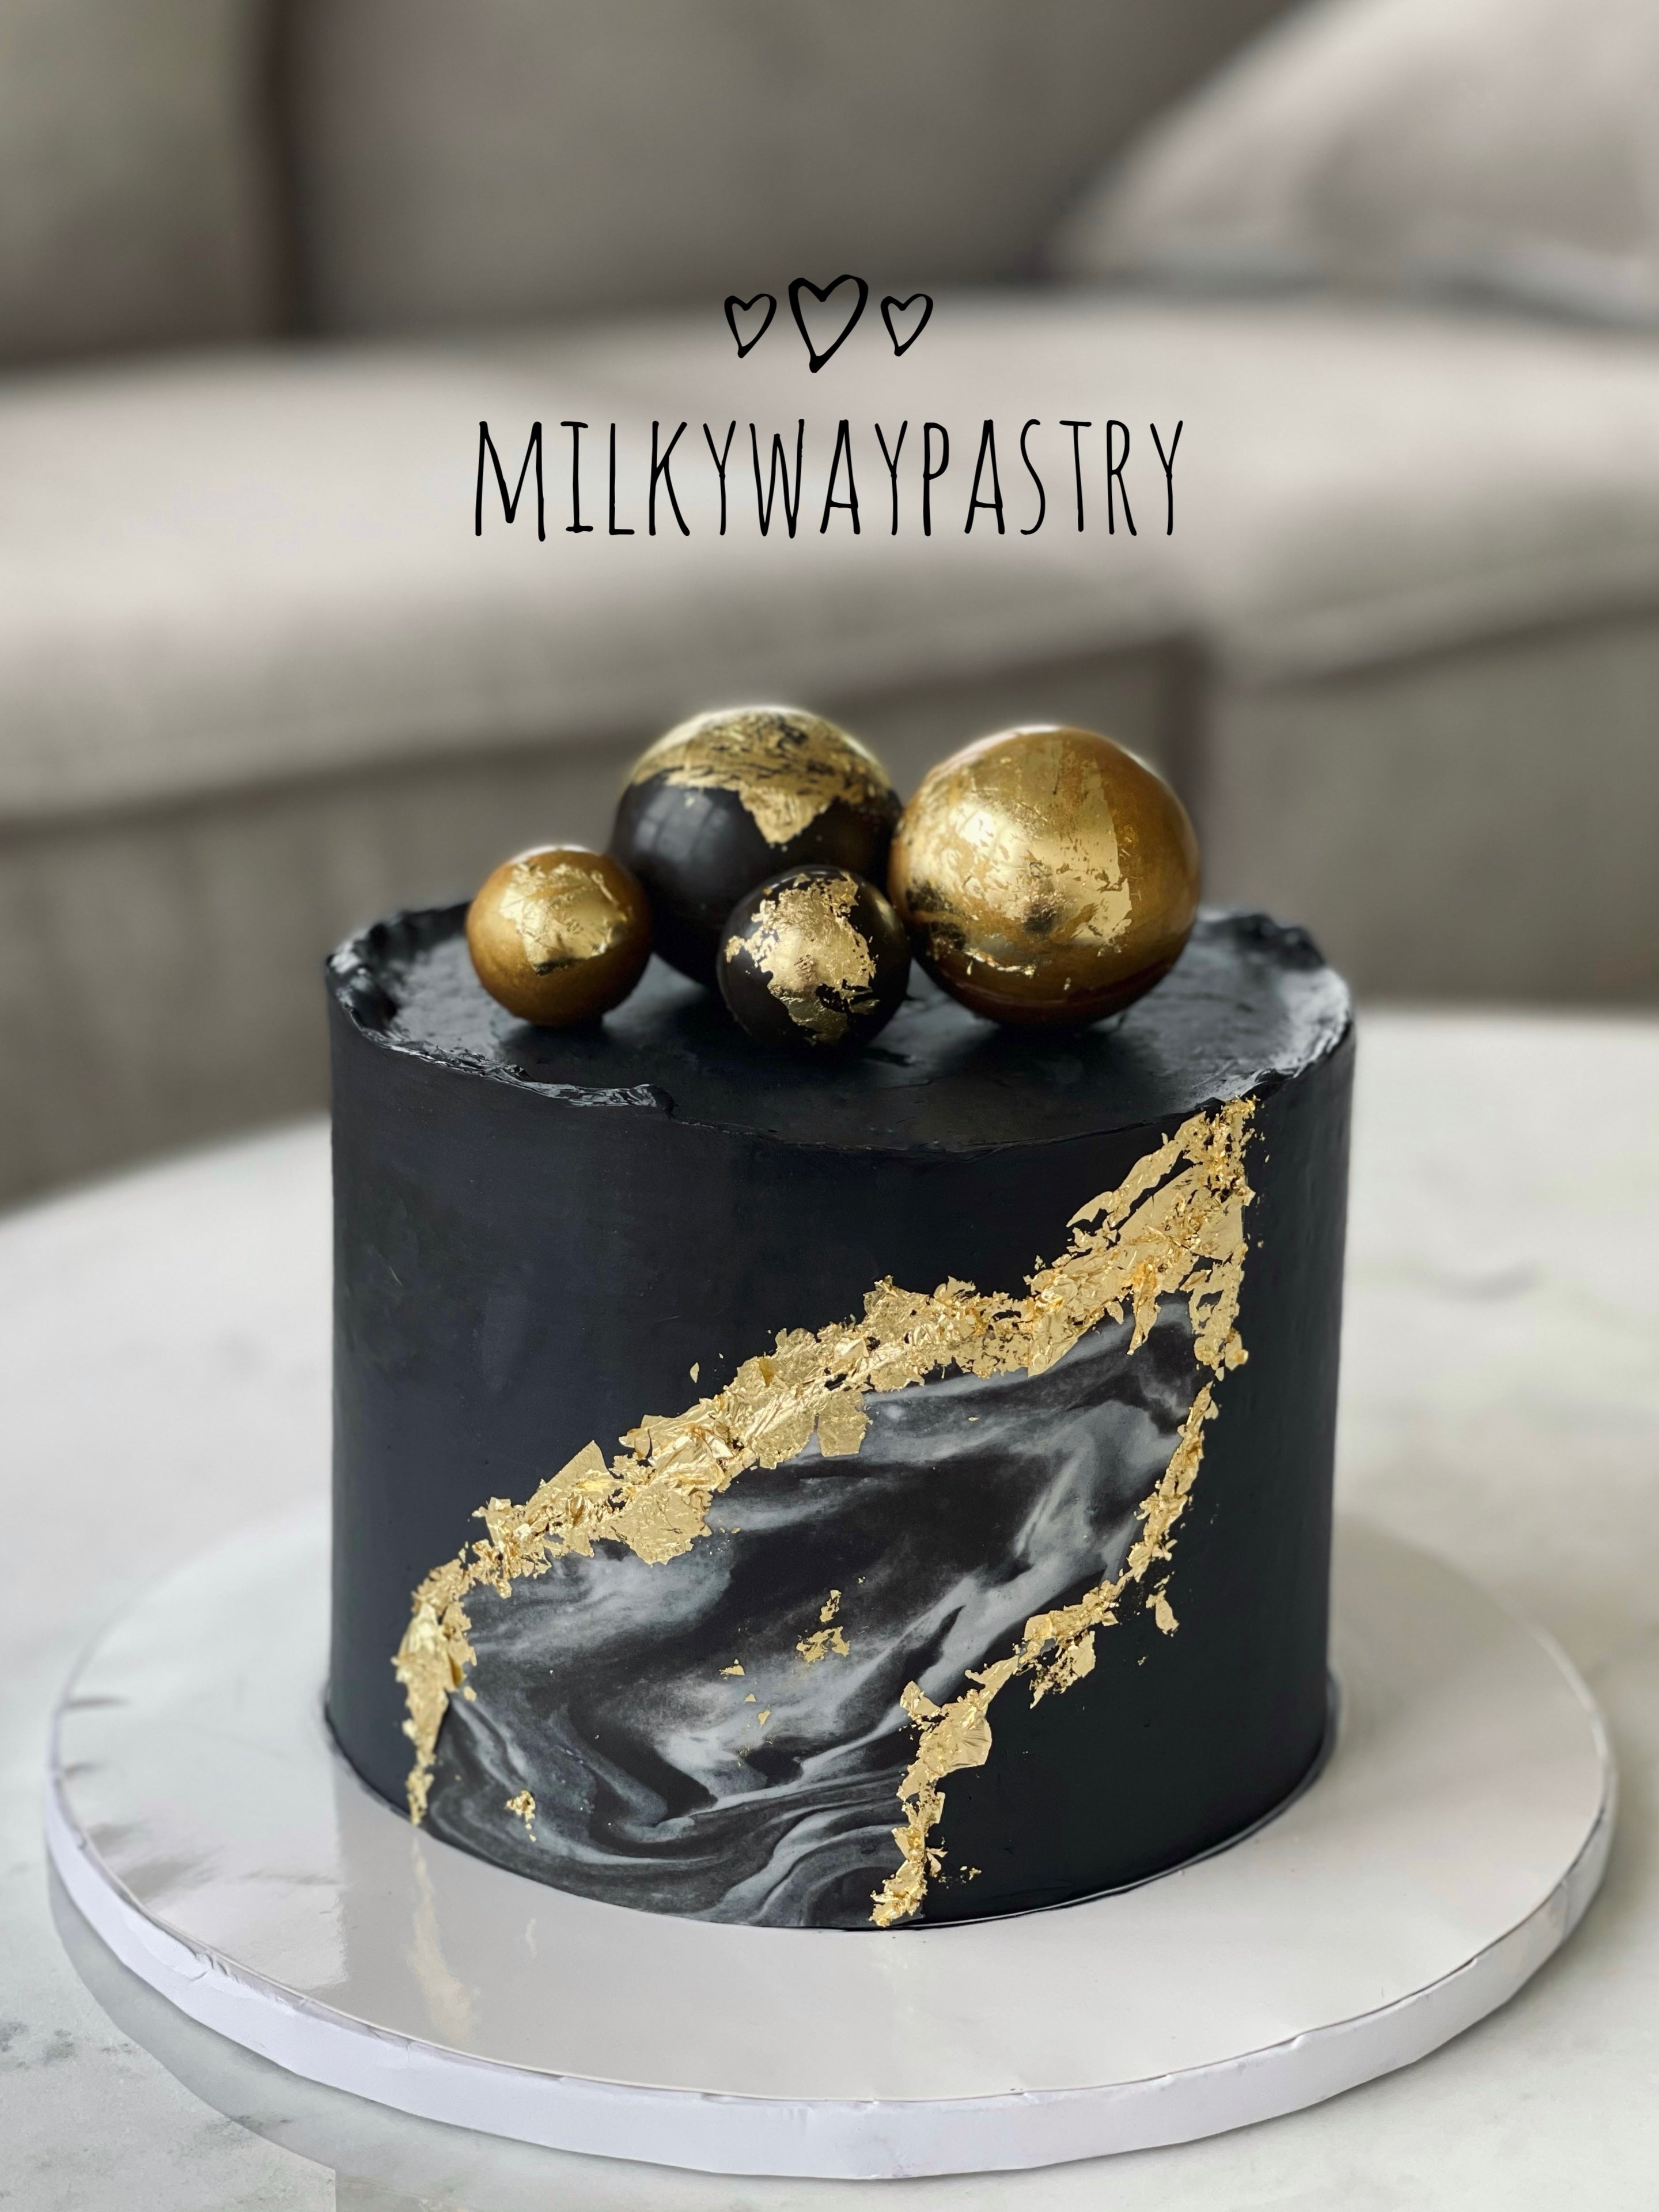 Carmen.cakes - Chocolate and gold themed drip cake for a 21st birthday.  Gorgeous cake topper by @silhouette_sue #cakesofinstagram #buttercreamcake  #buttercream #chocolatebuttercream #ganache #gold #aftereight #homebaker |  Facebook